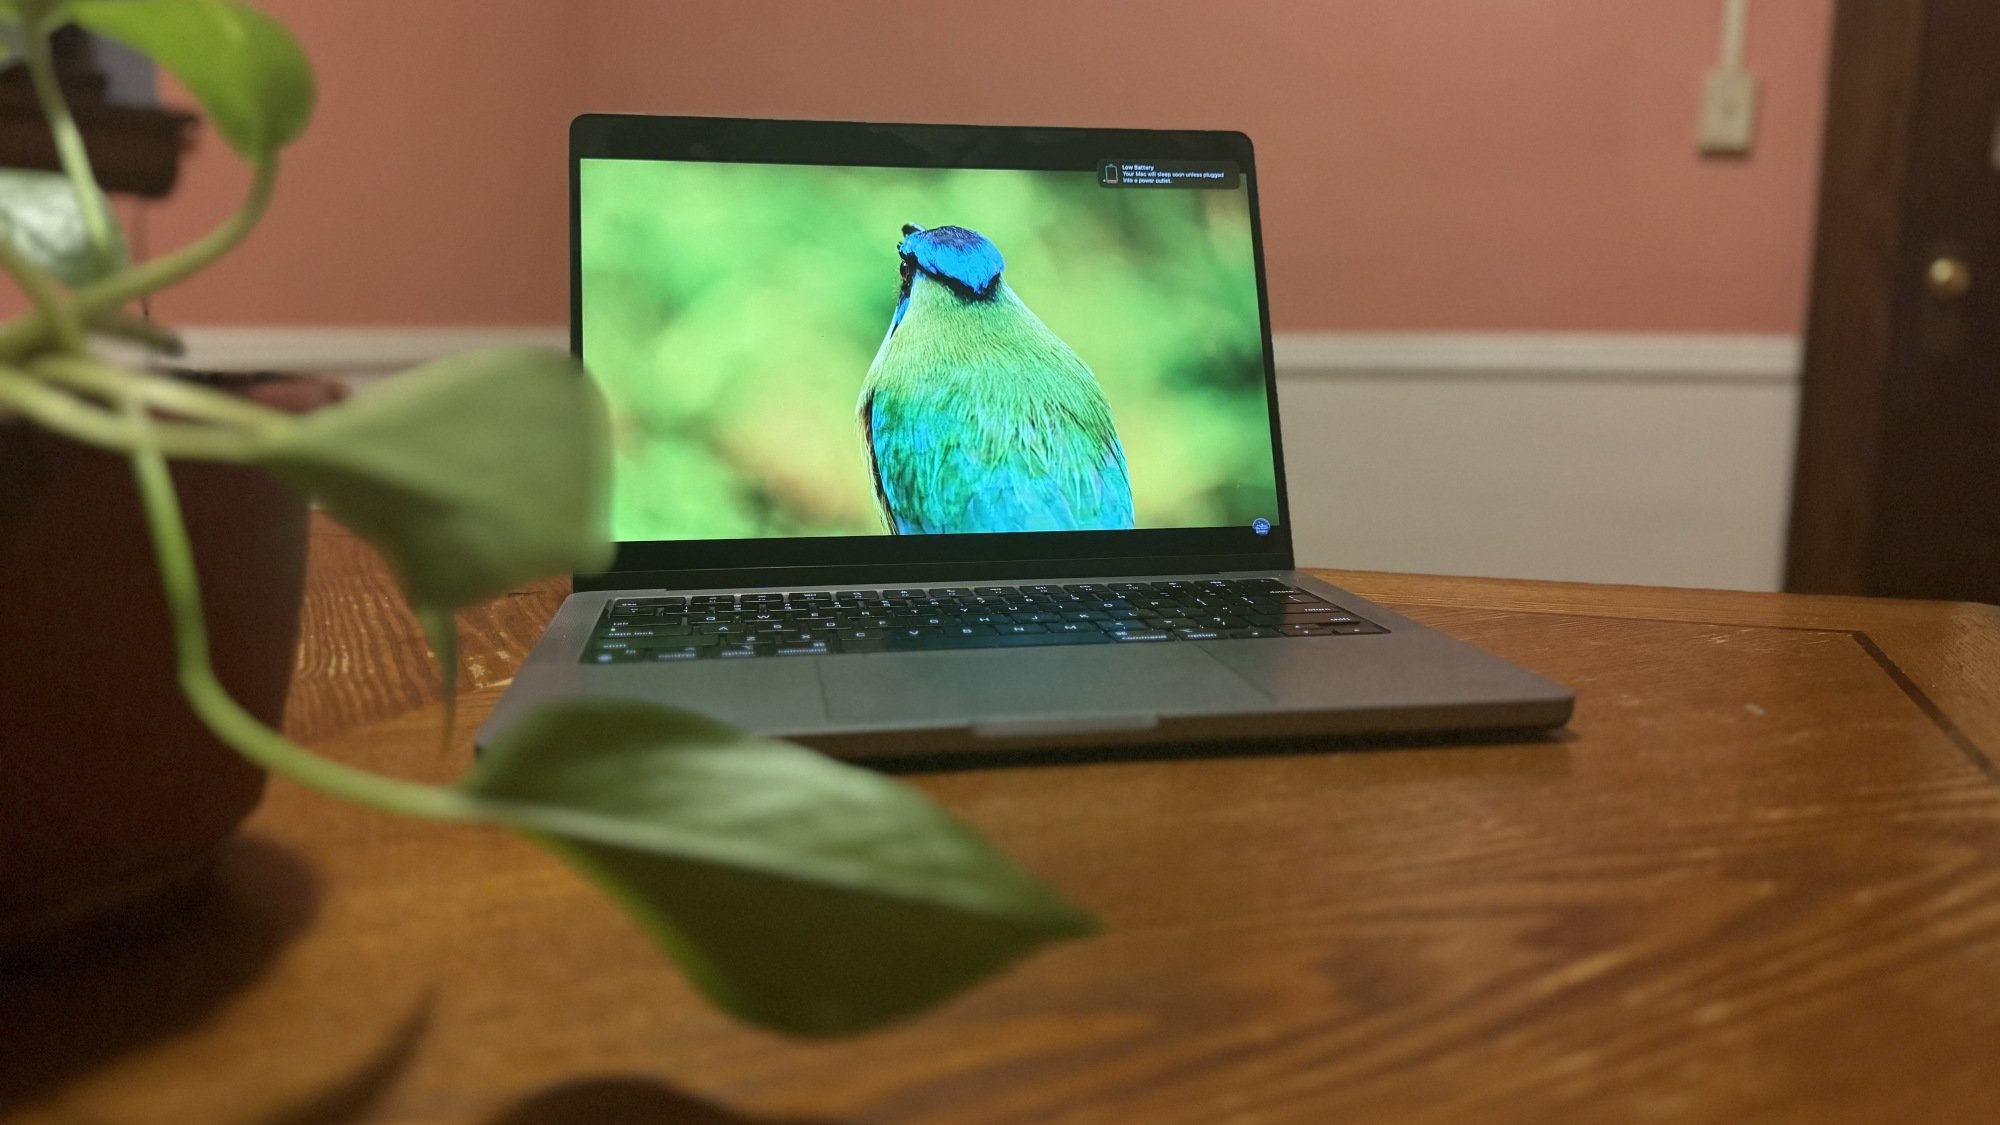 M3 14-inch MacBook Pro sitting on a table with a plant